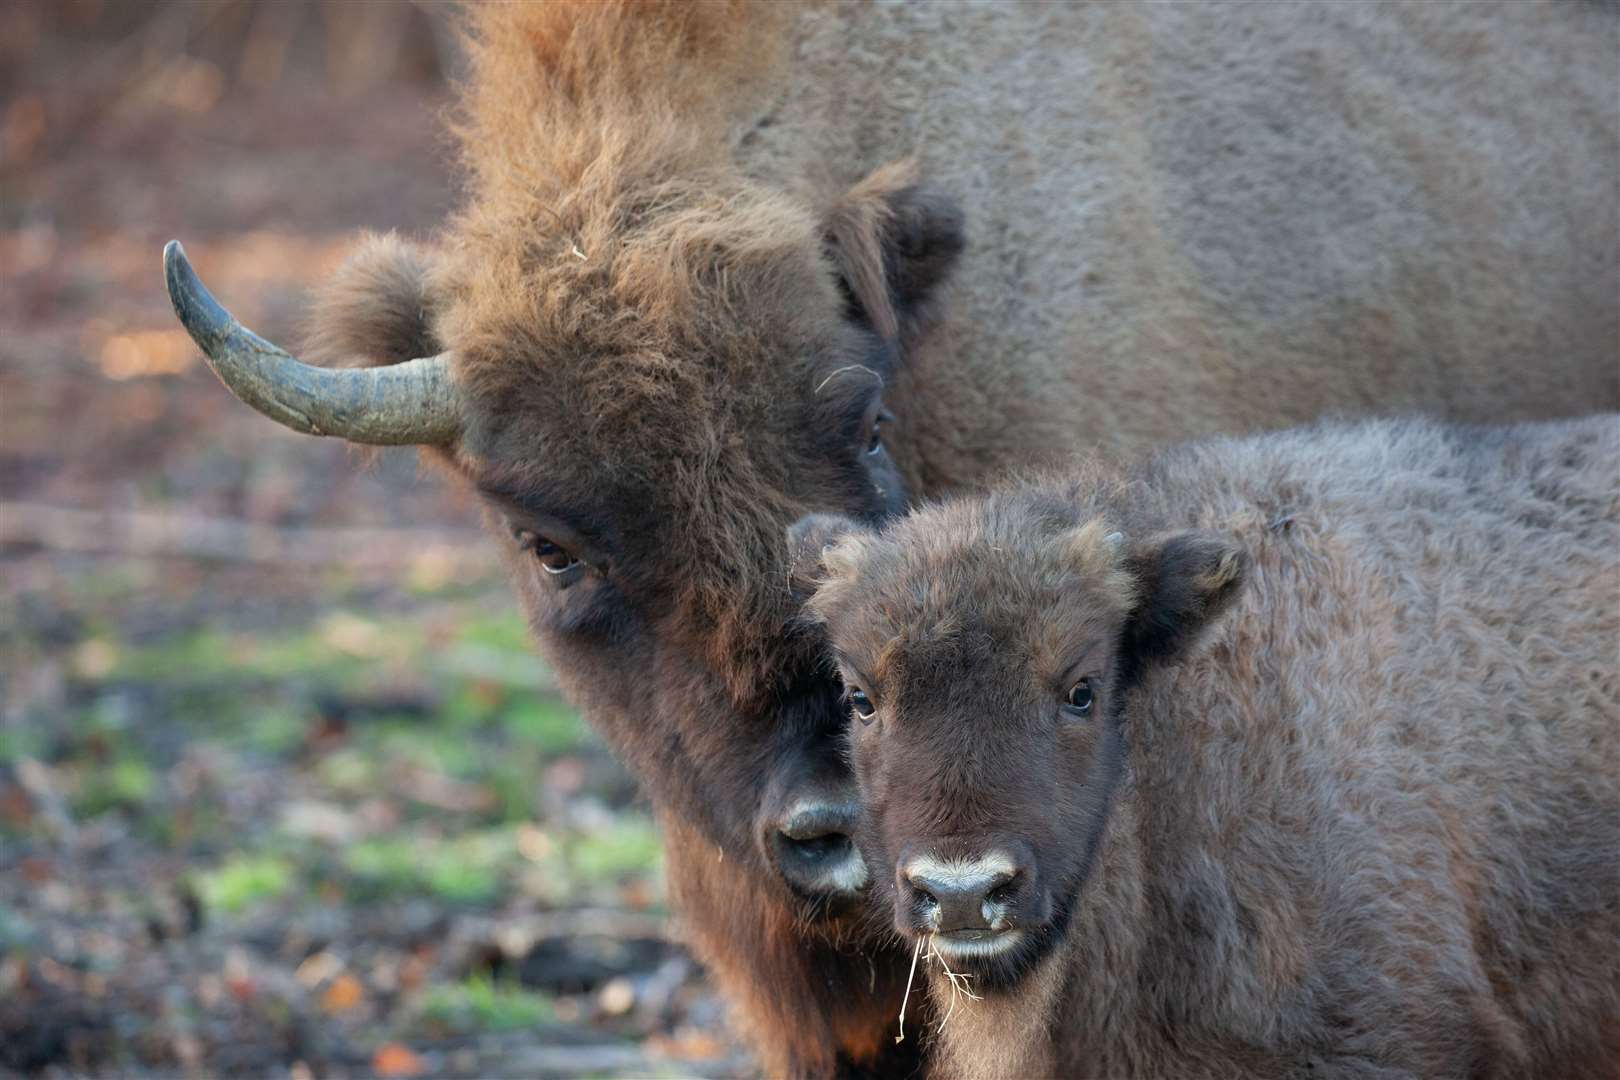 Donovan Wright caught the bison calf on camera. Picture: Donovan Wright